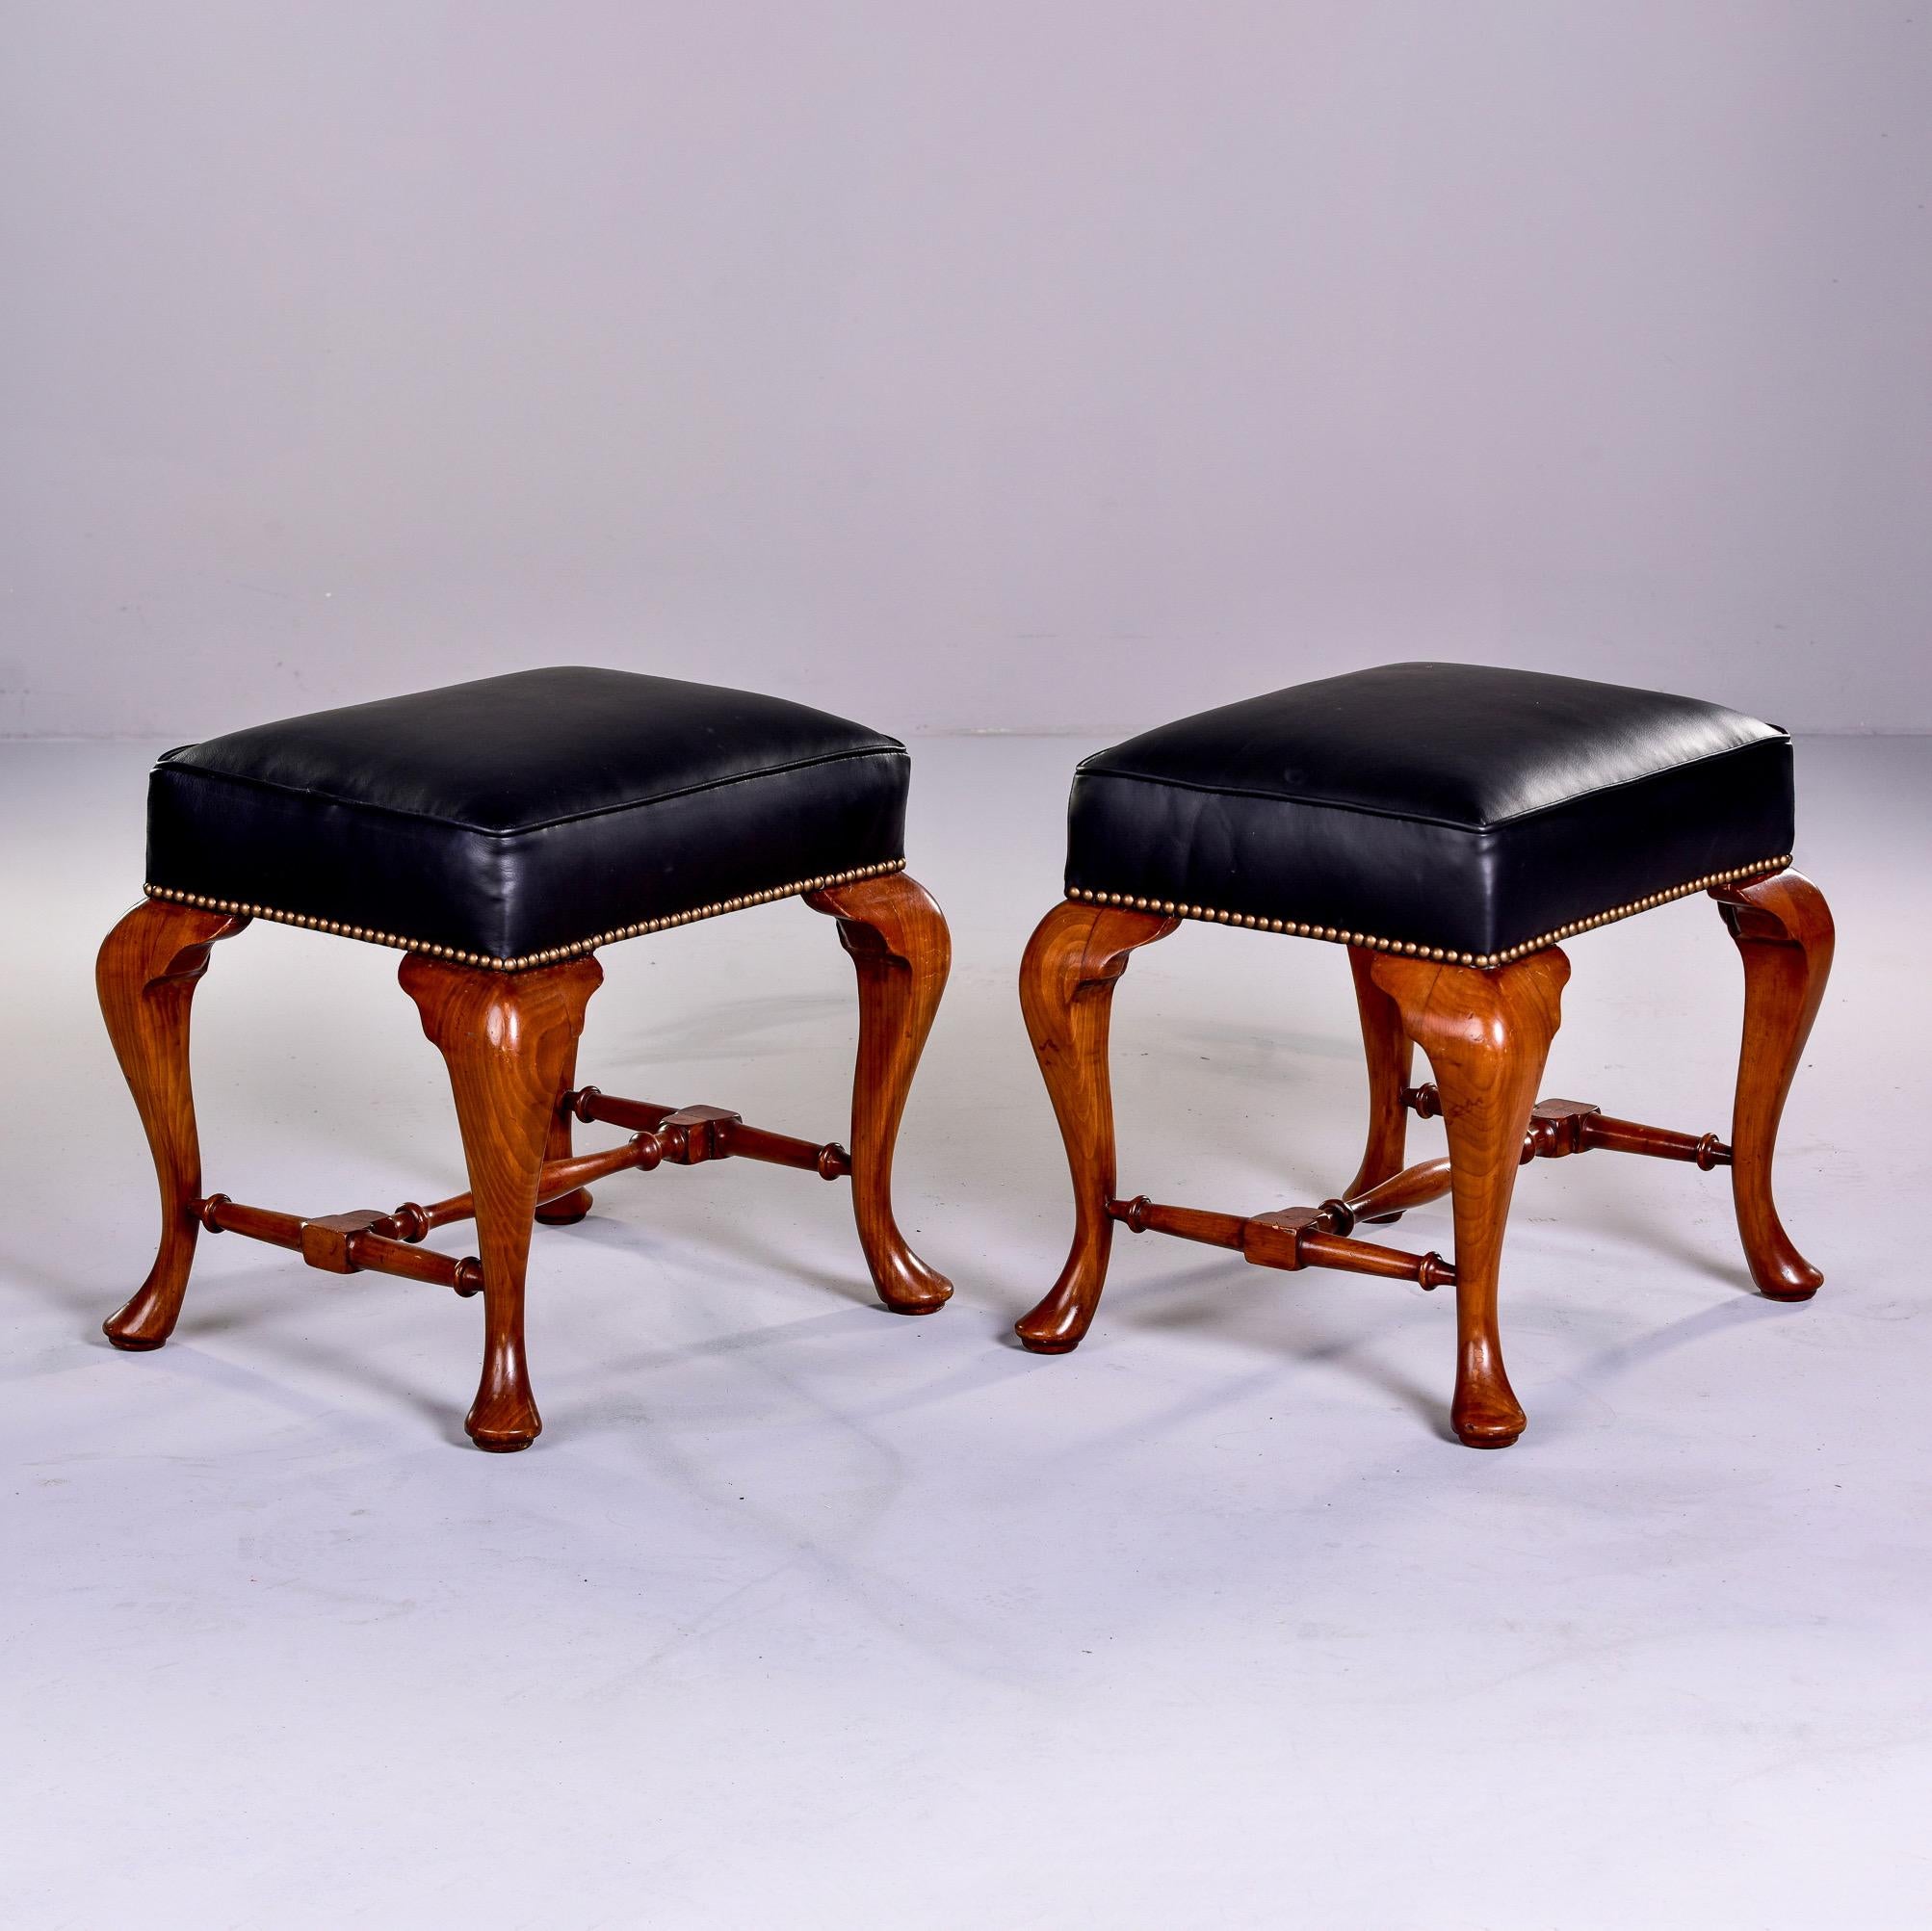 Circa 1920s pair of English stools with cherry frames, dramatic cabriole legs and new black leather upholstery with brass nail heads along bottom edge. Unknown maker. Sold and priced as a pair.
 